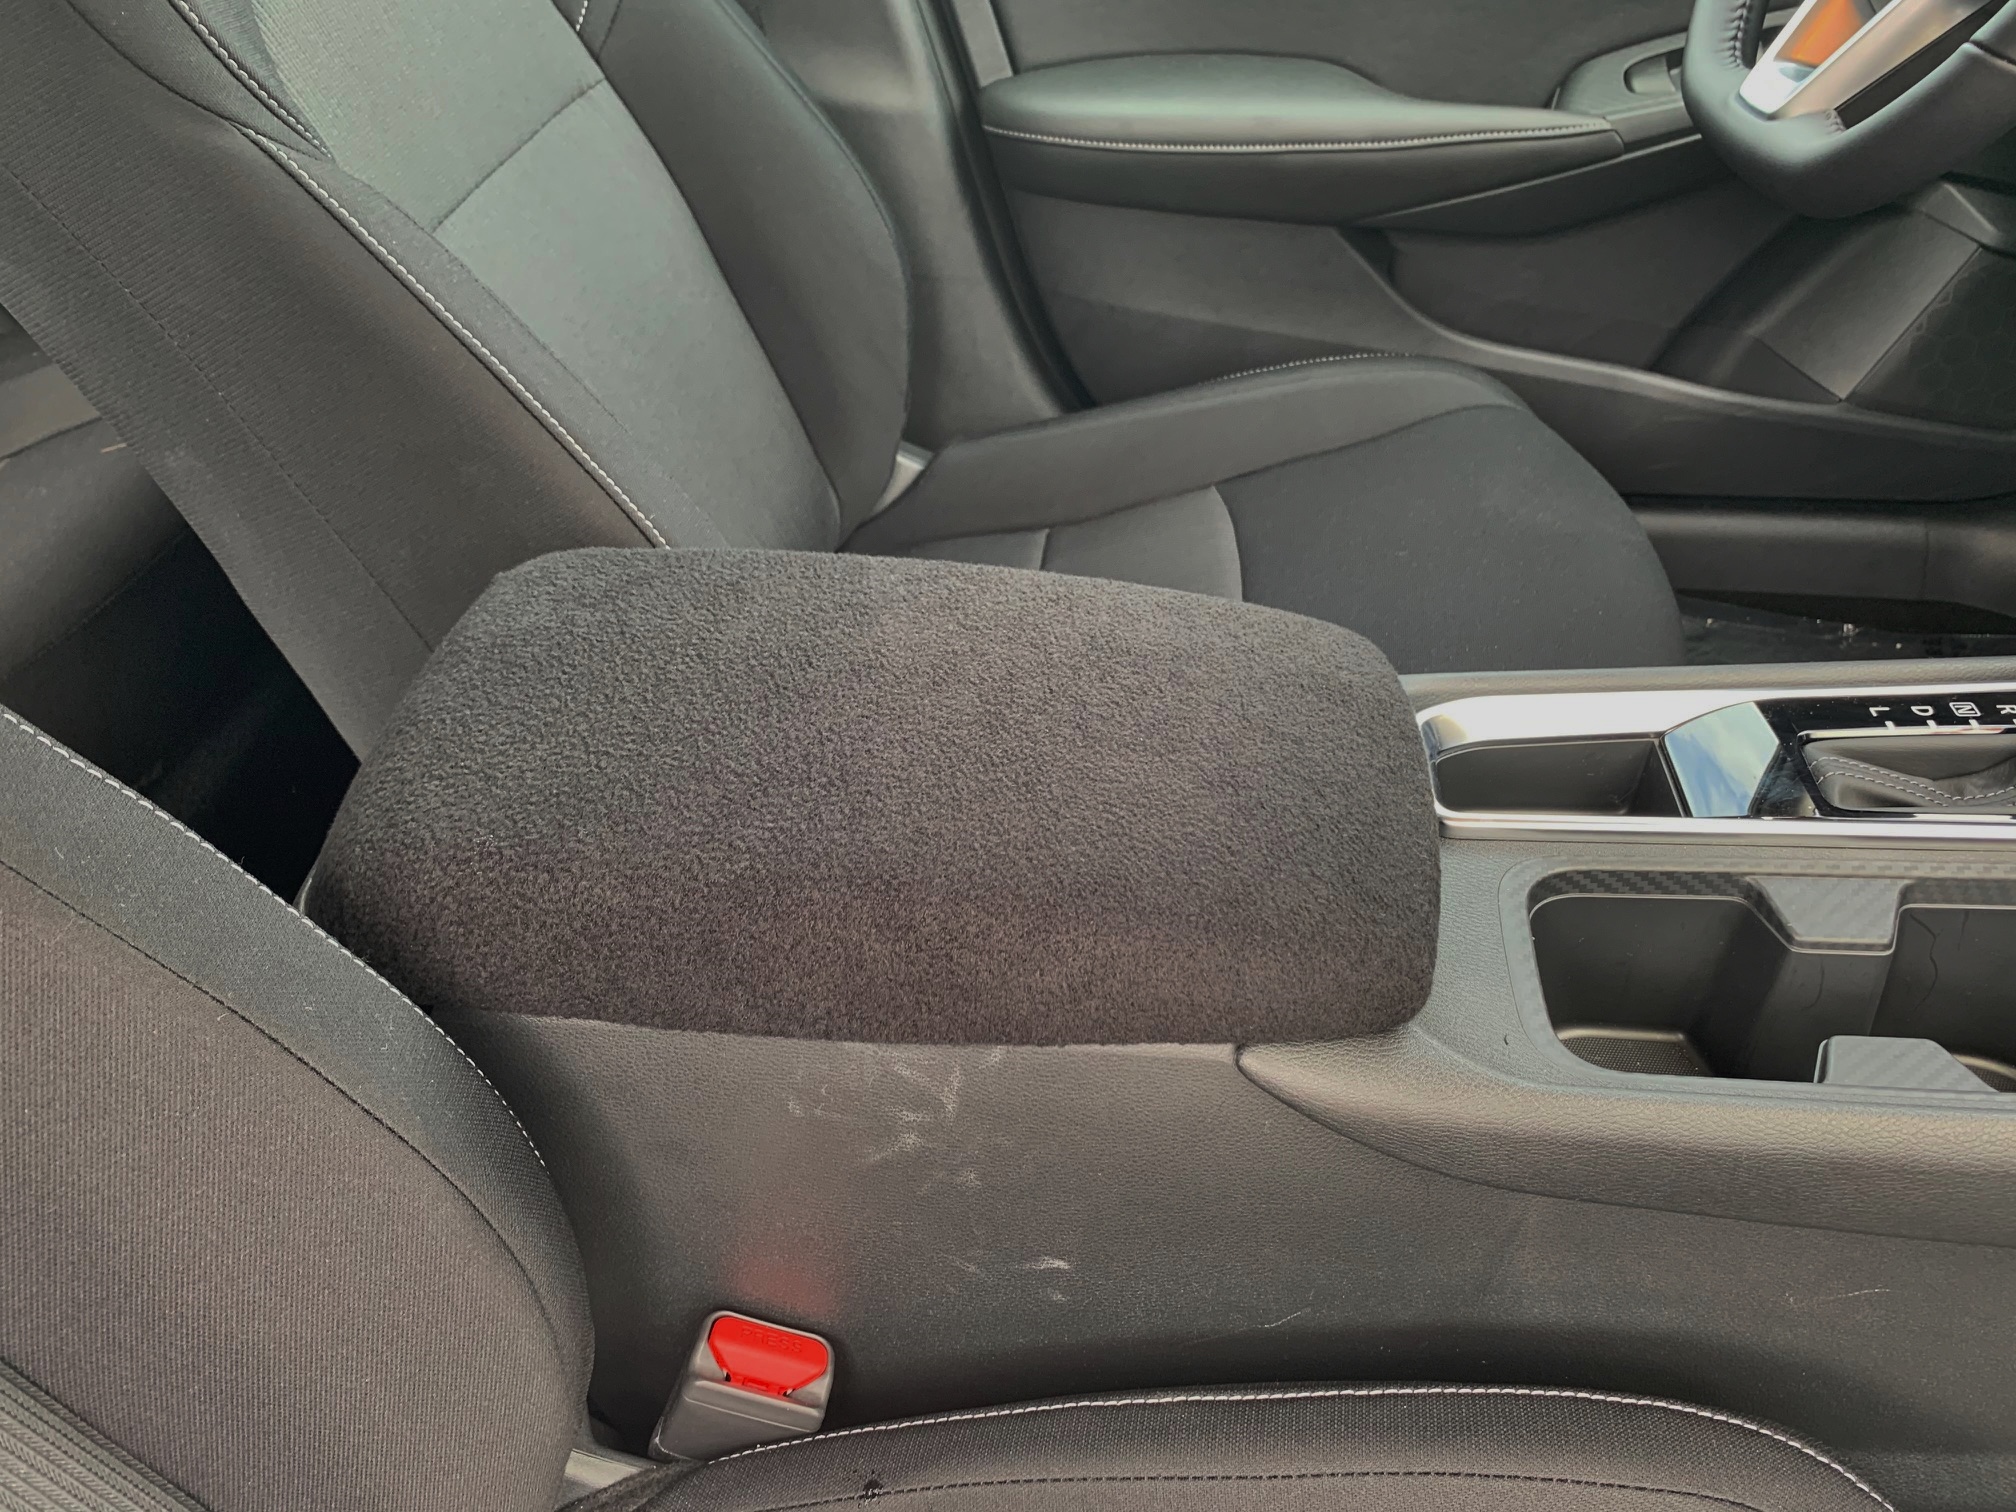 Buy Fleece Center Console Armrest Cover fits the Nissan Sentra 2020-2022